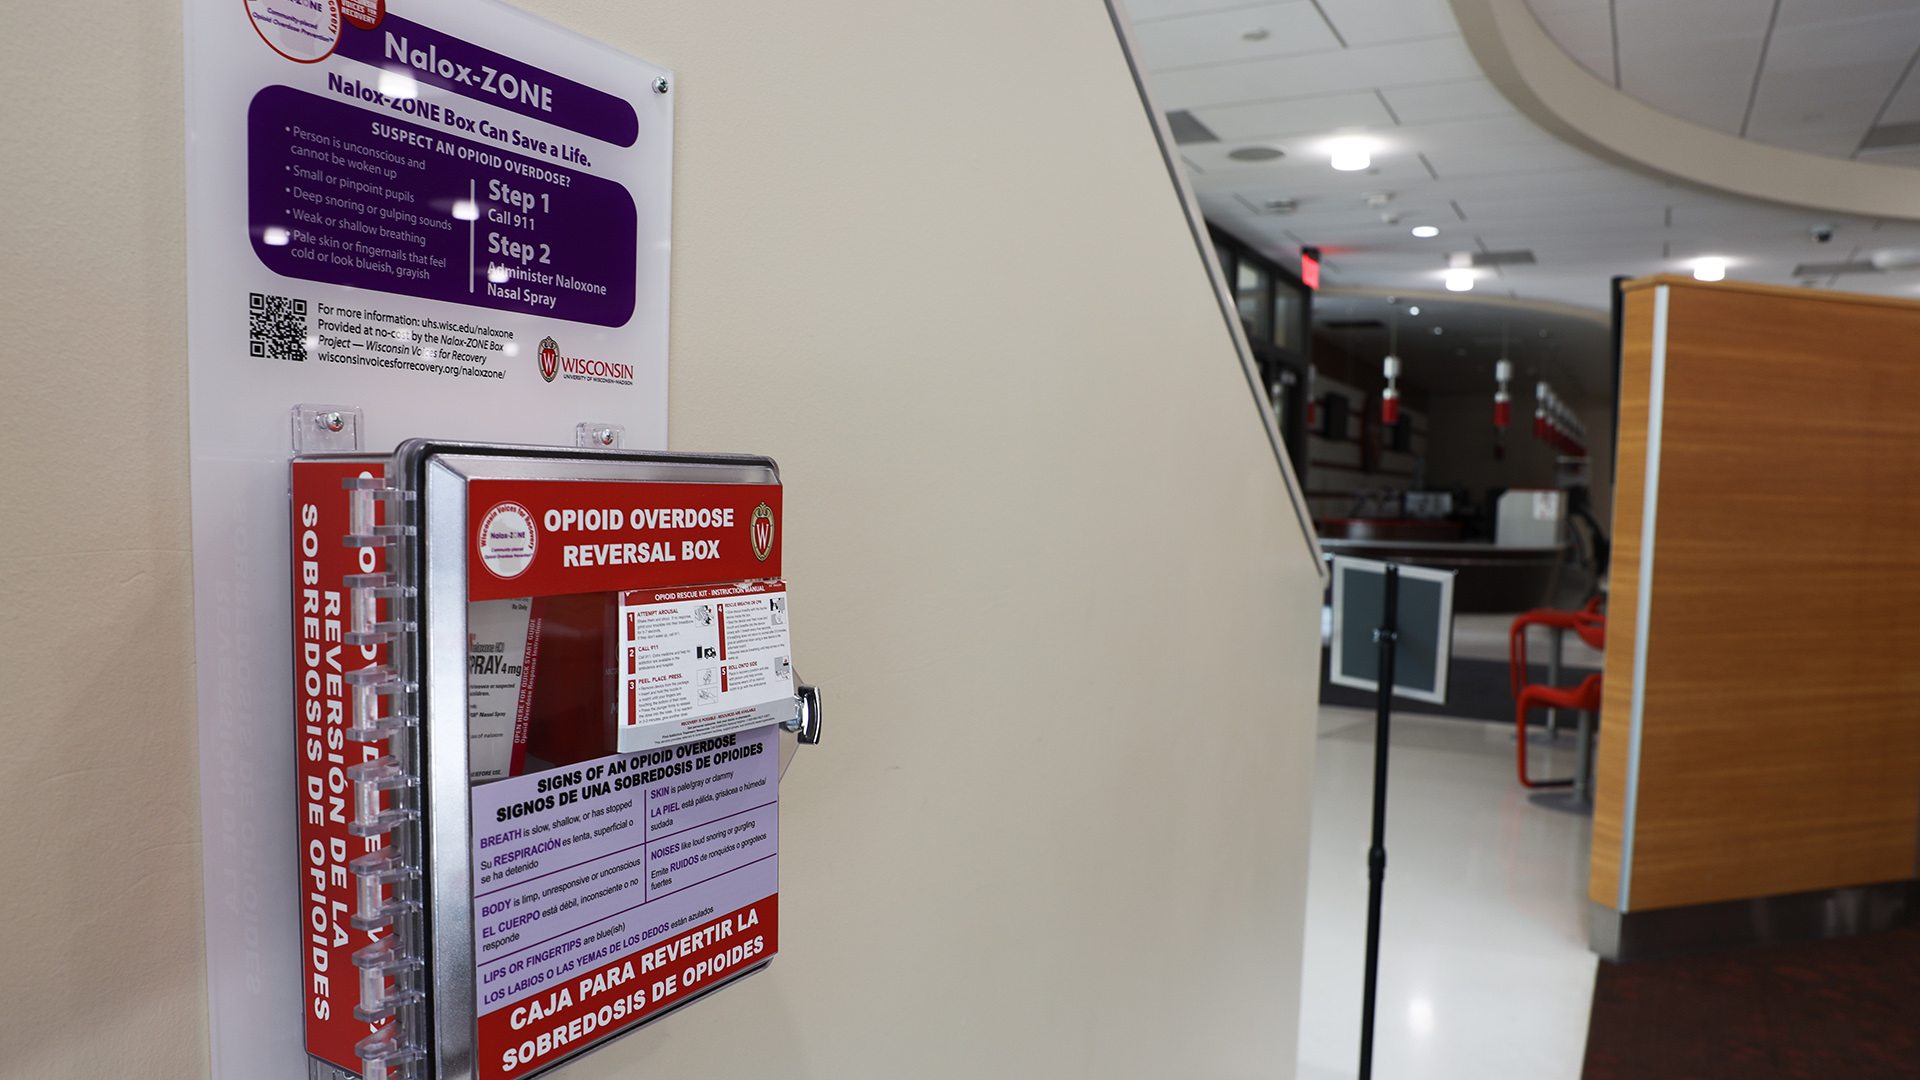 A wall mounted metal-sided box with the label "Opioid Overdose Reversal Box" and instructions in text of different sizes is mounted on a wall alongside a plastic sign with the label "Nalox-ZONE" in a room with food service counters in the background.